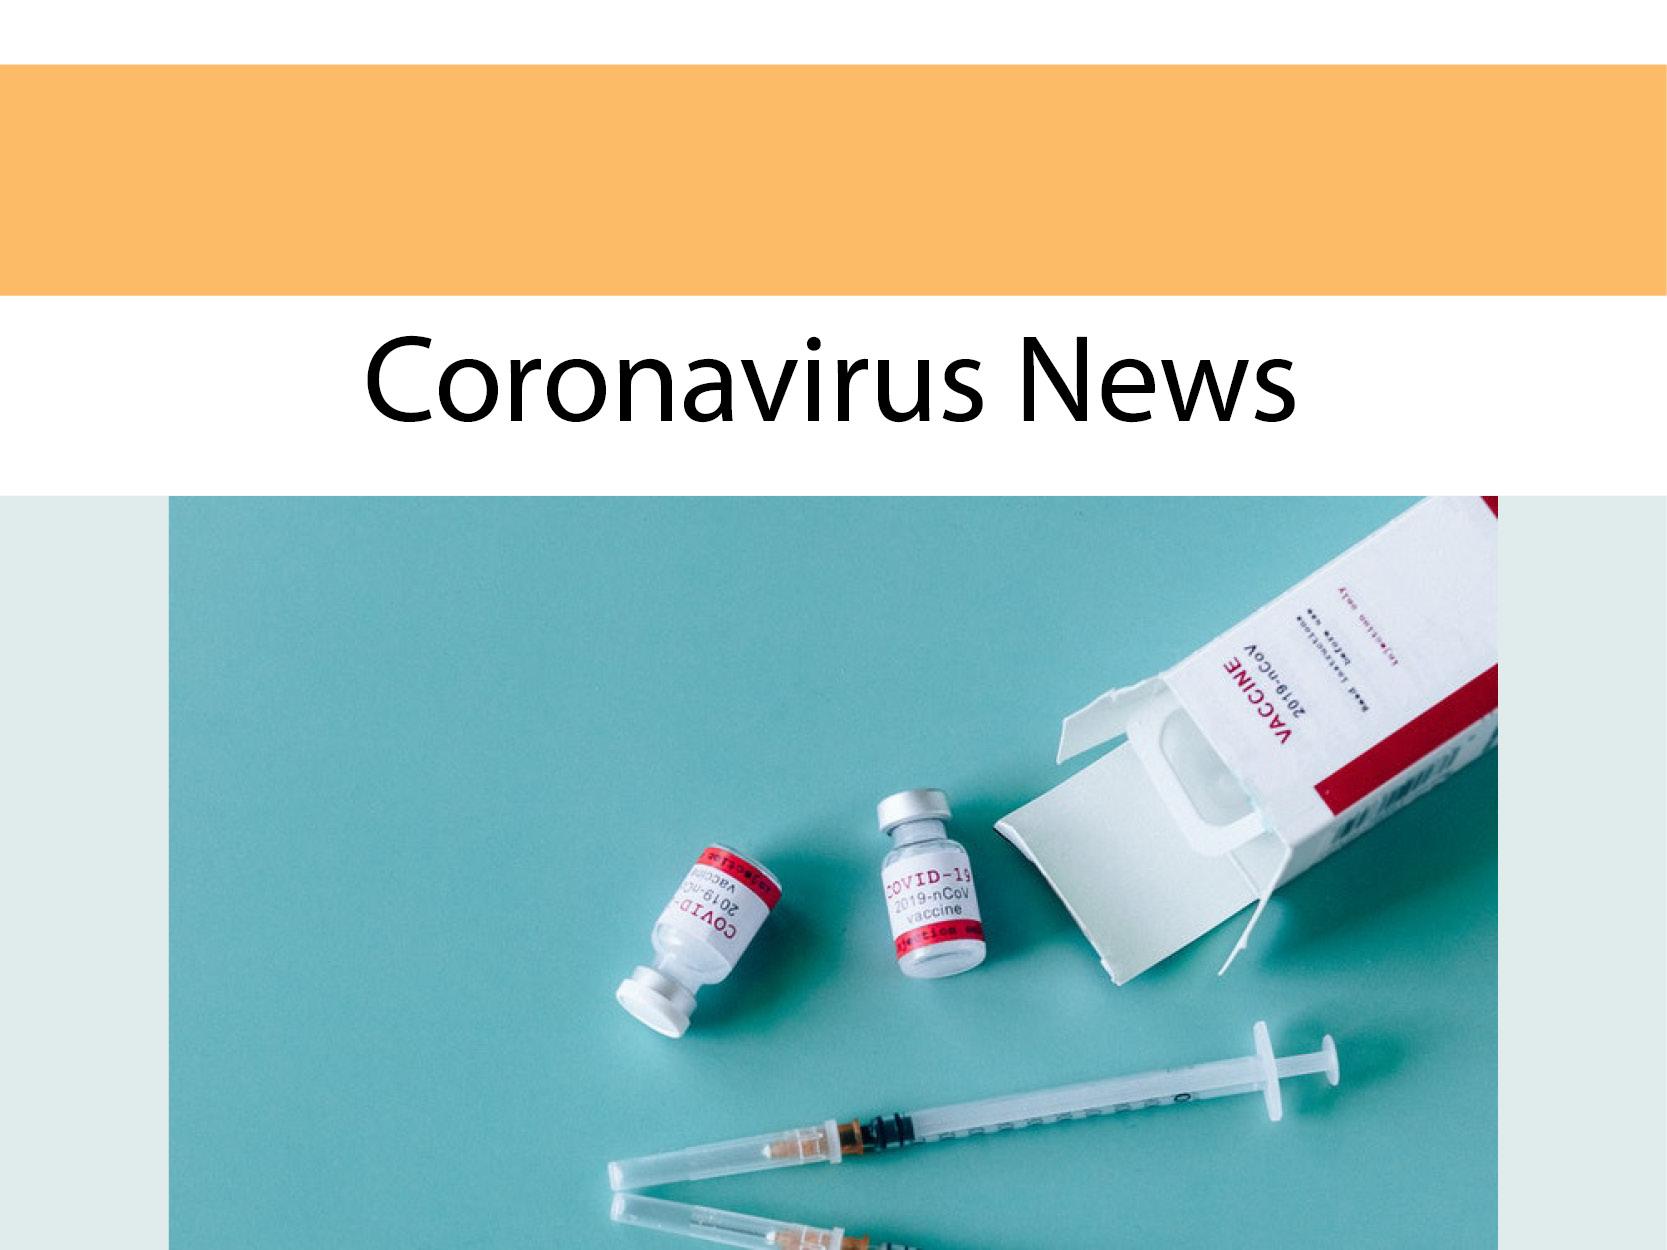 Argenteuil residents aged 80 and older now eligible for COVID-19 vaccination